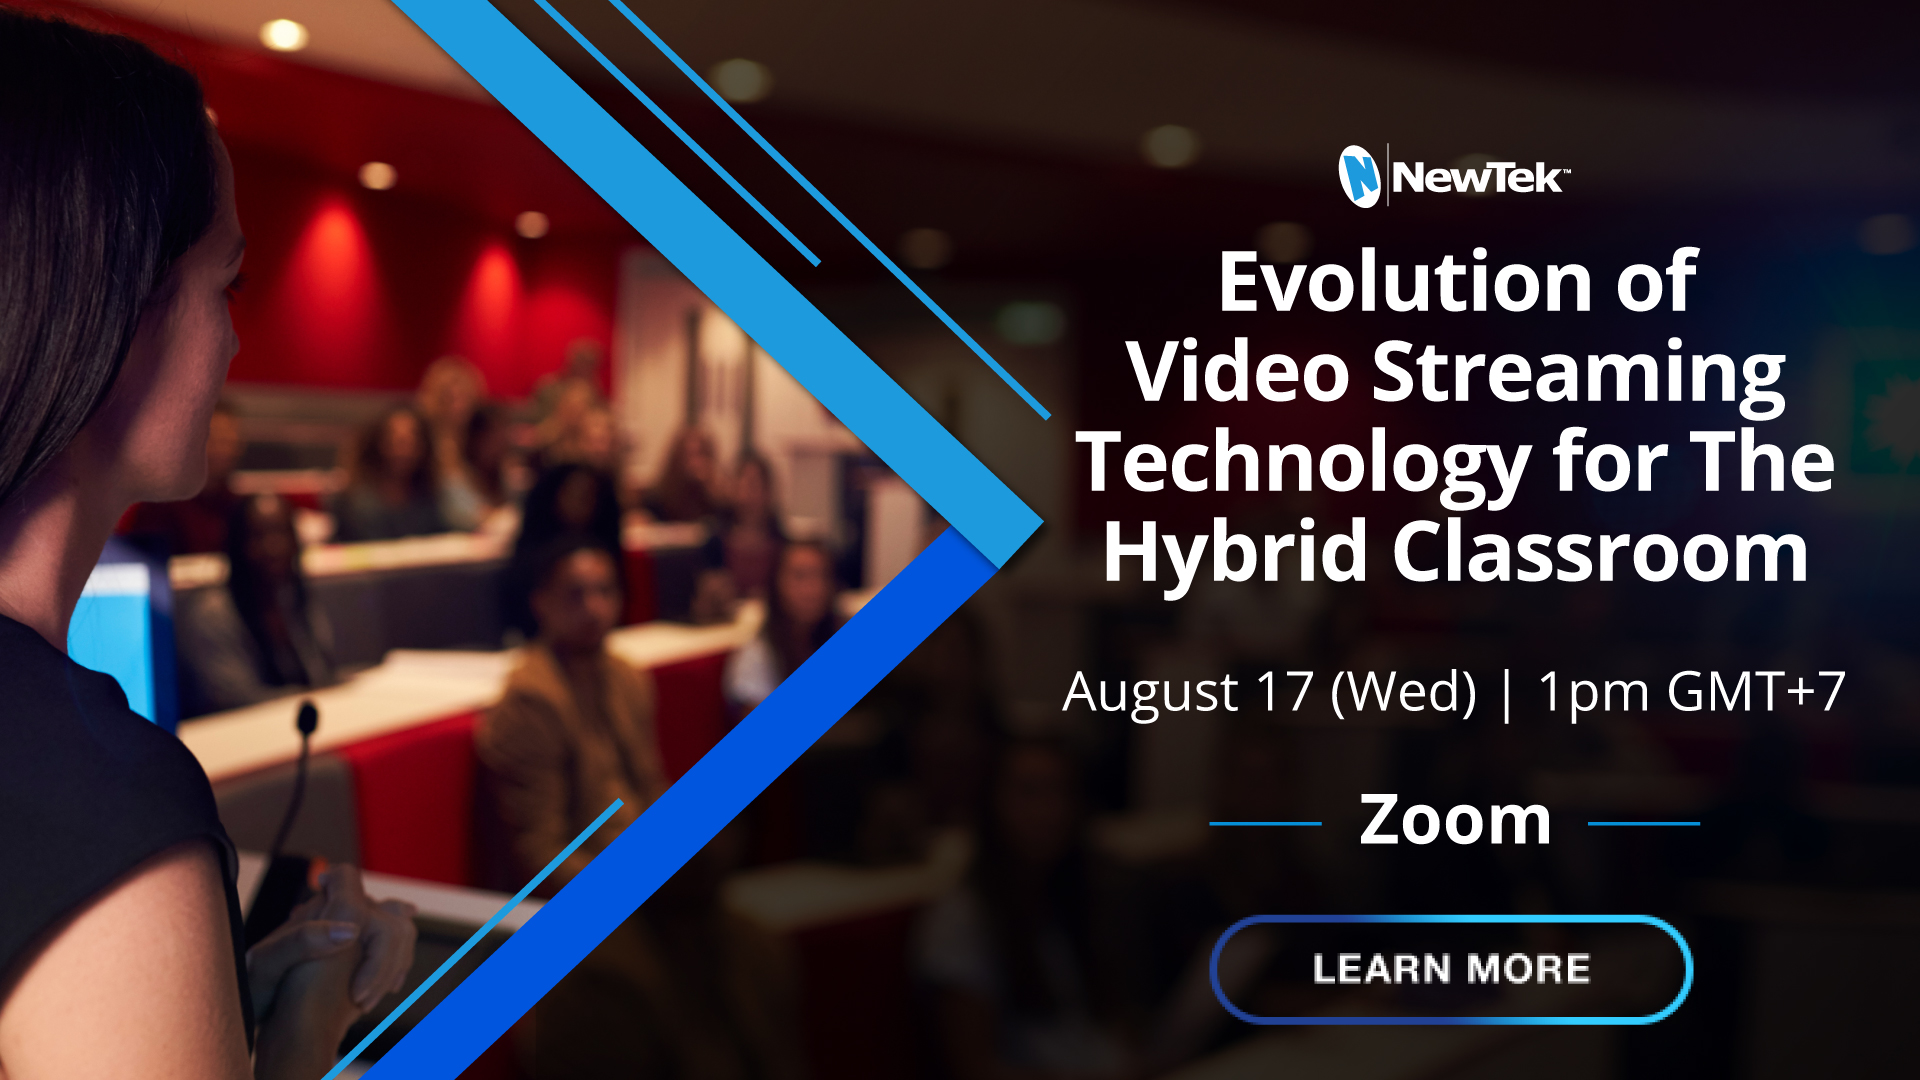 Evolution of Video Streaming Technology for the Hybrid Classroom